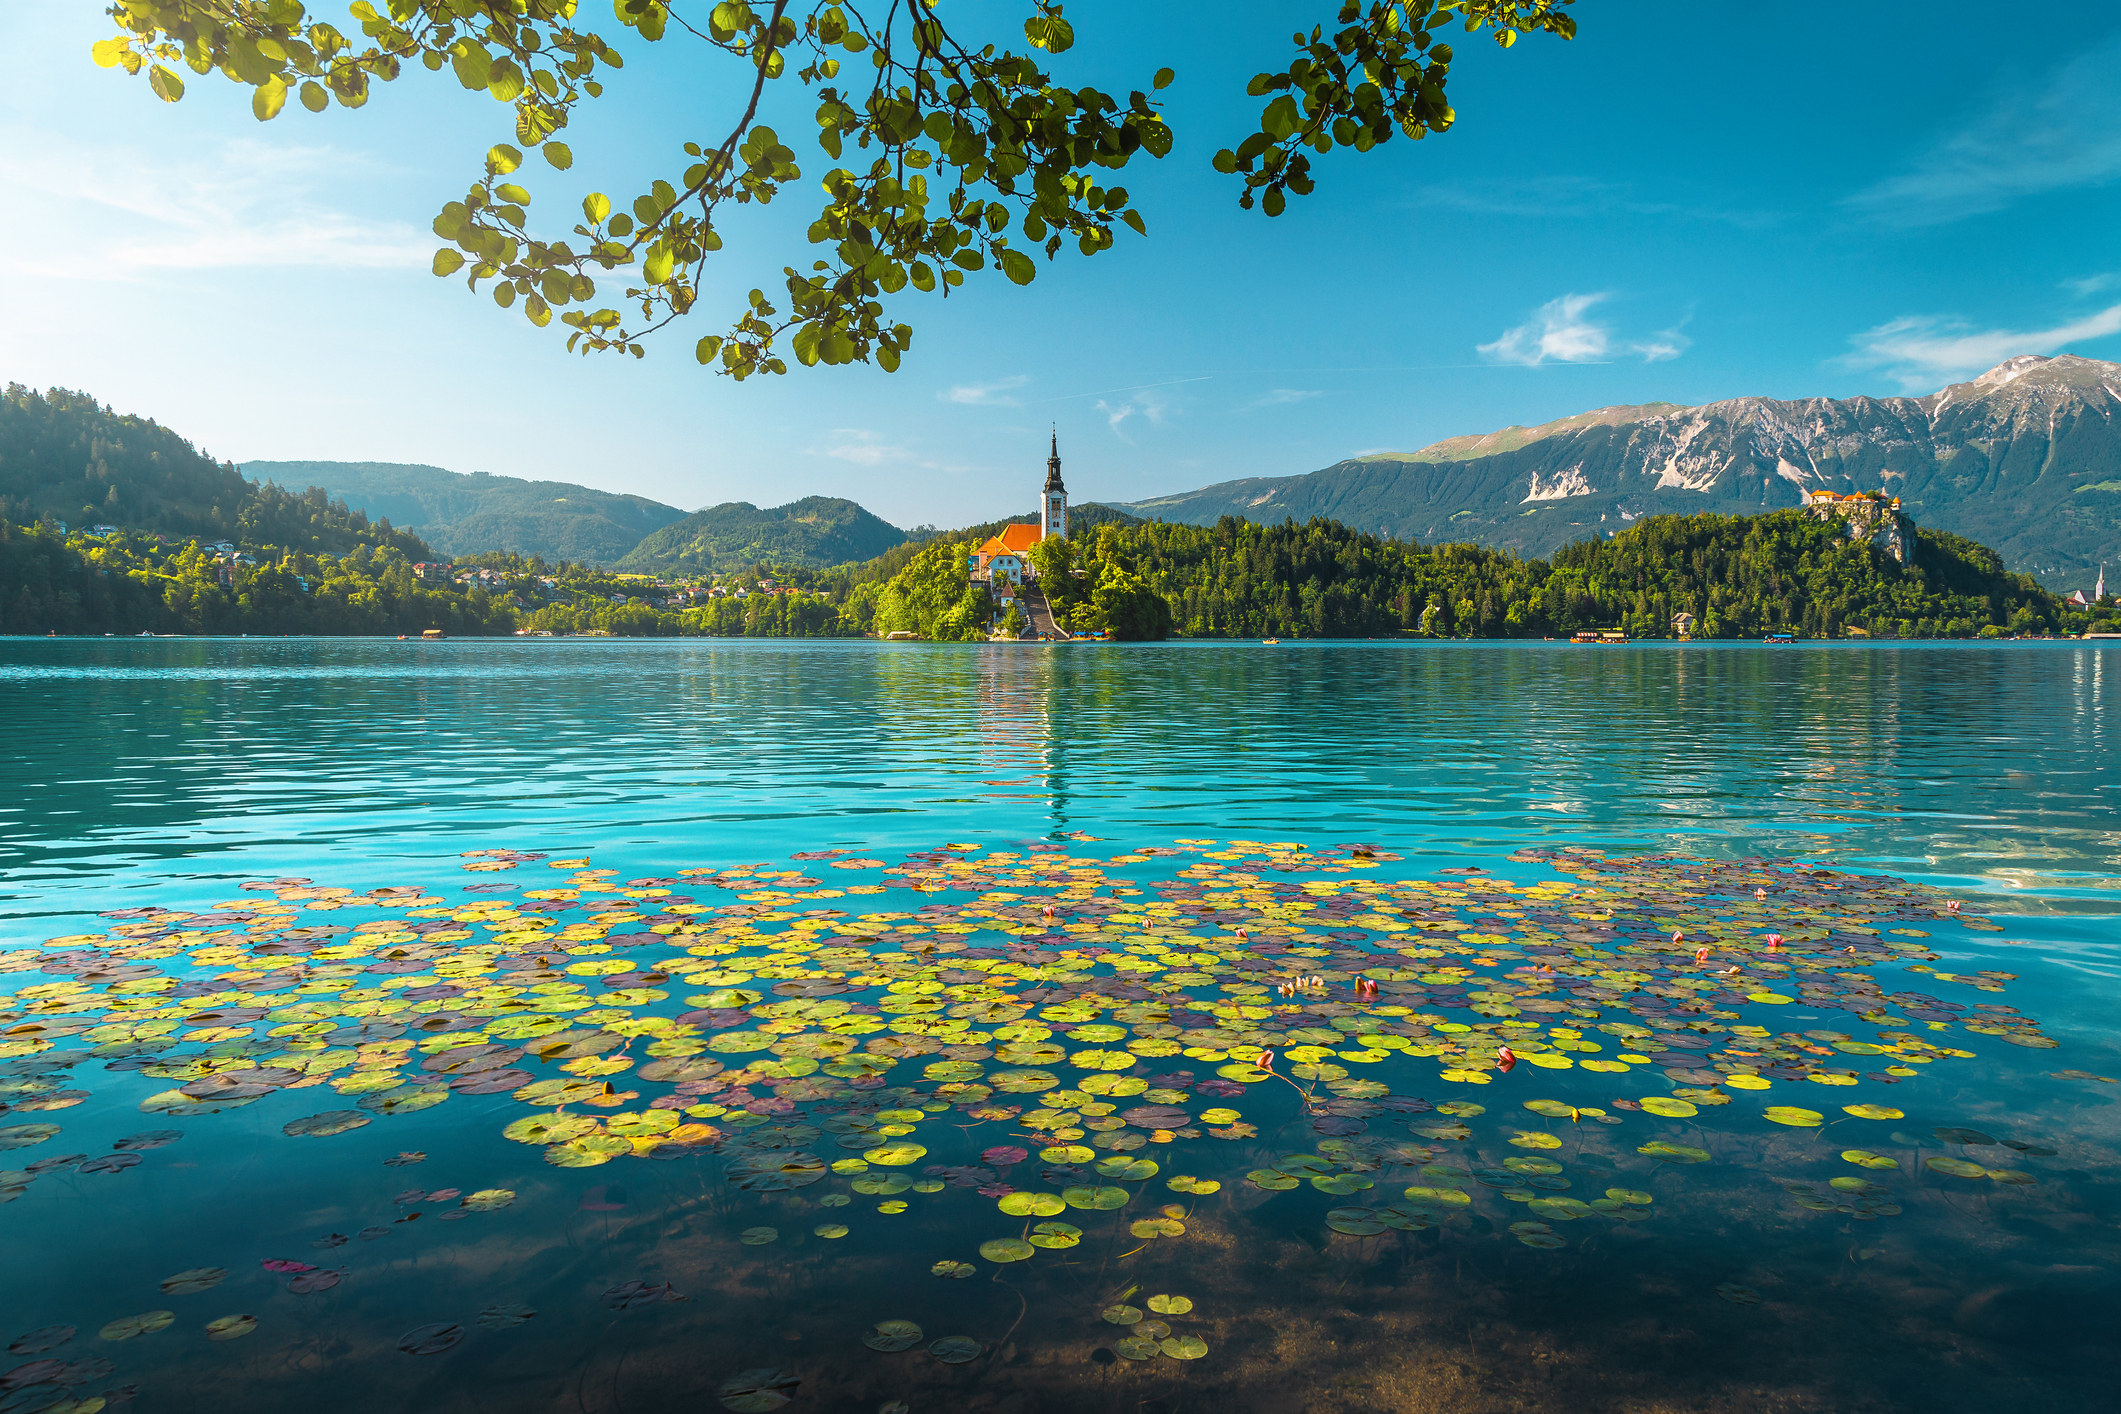 Lake Bled during the summertime